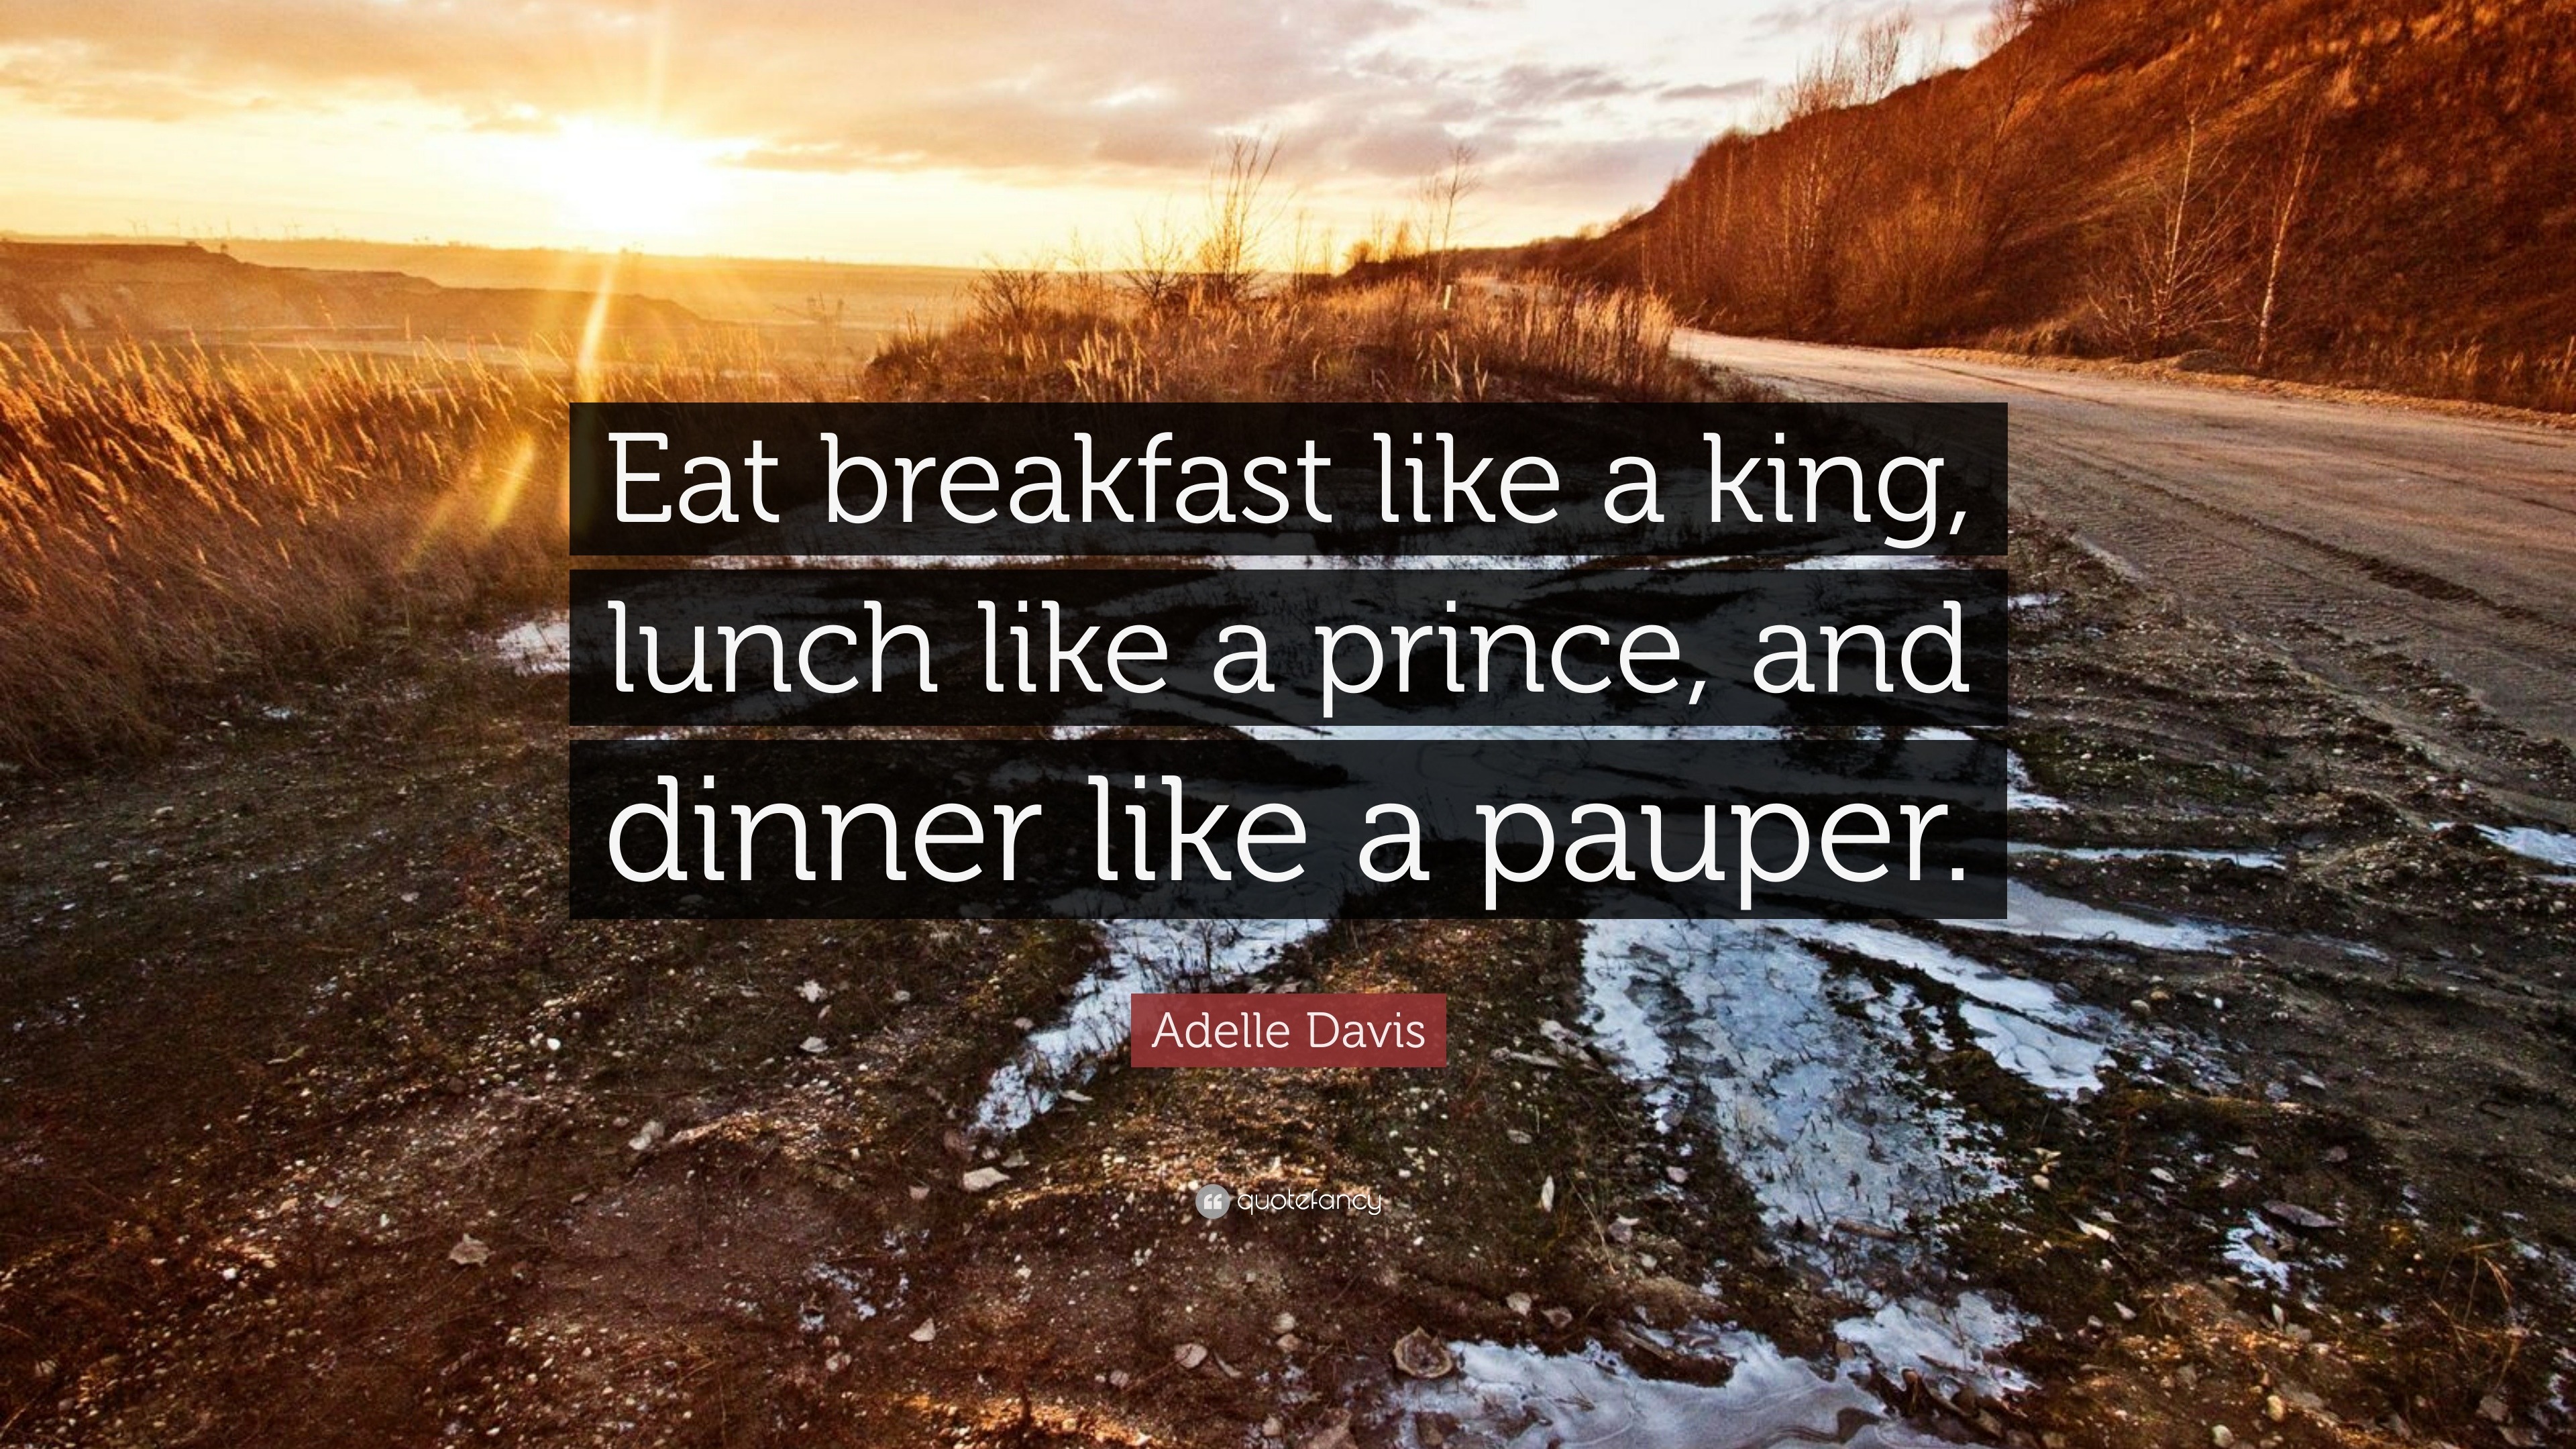 Adelle Davis Quote: “Eat breakfast like a king, lunch like a prince